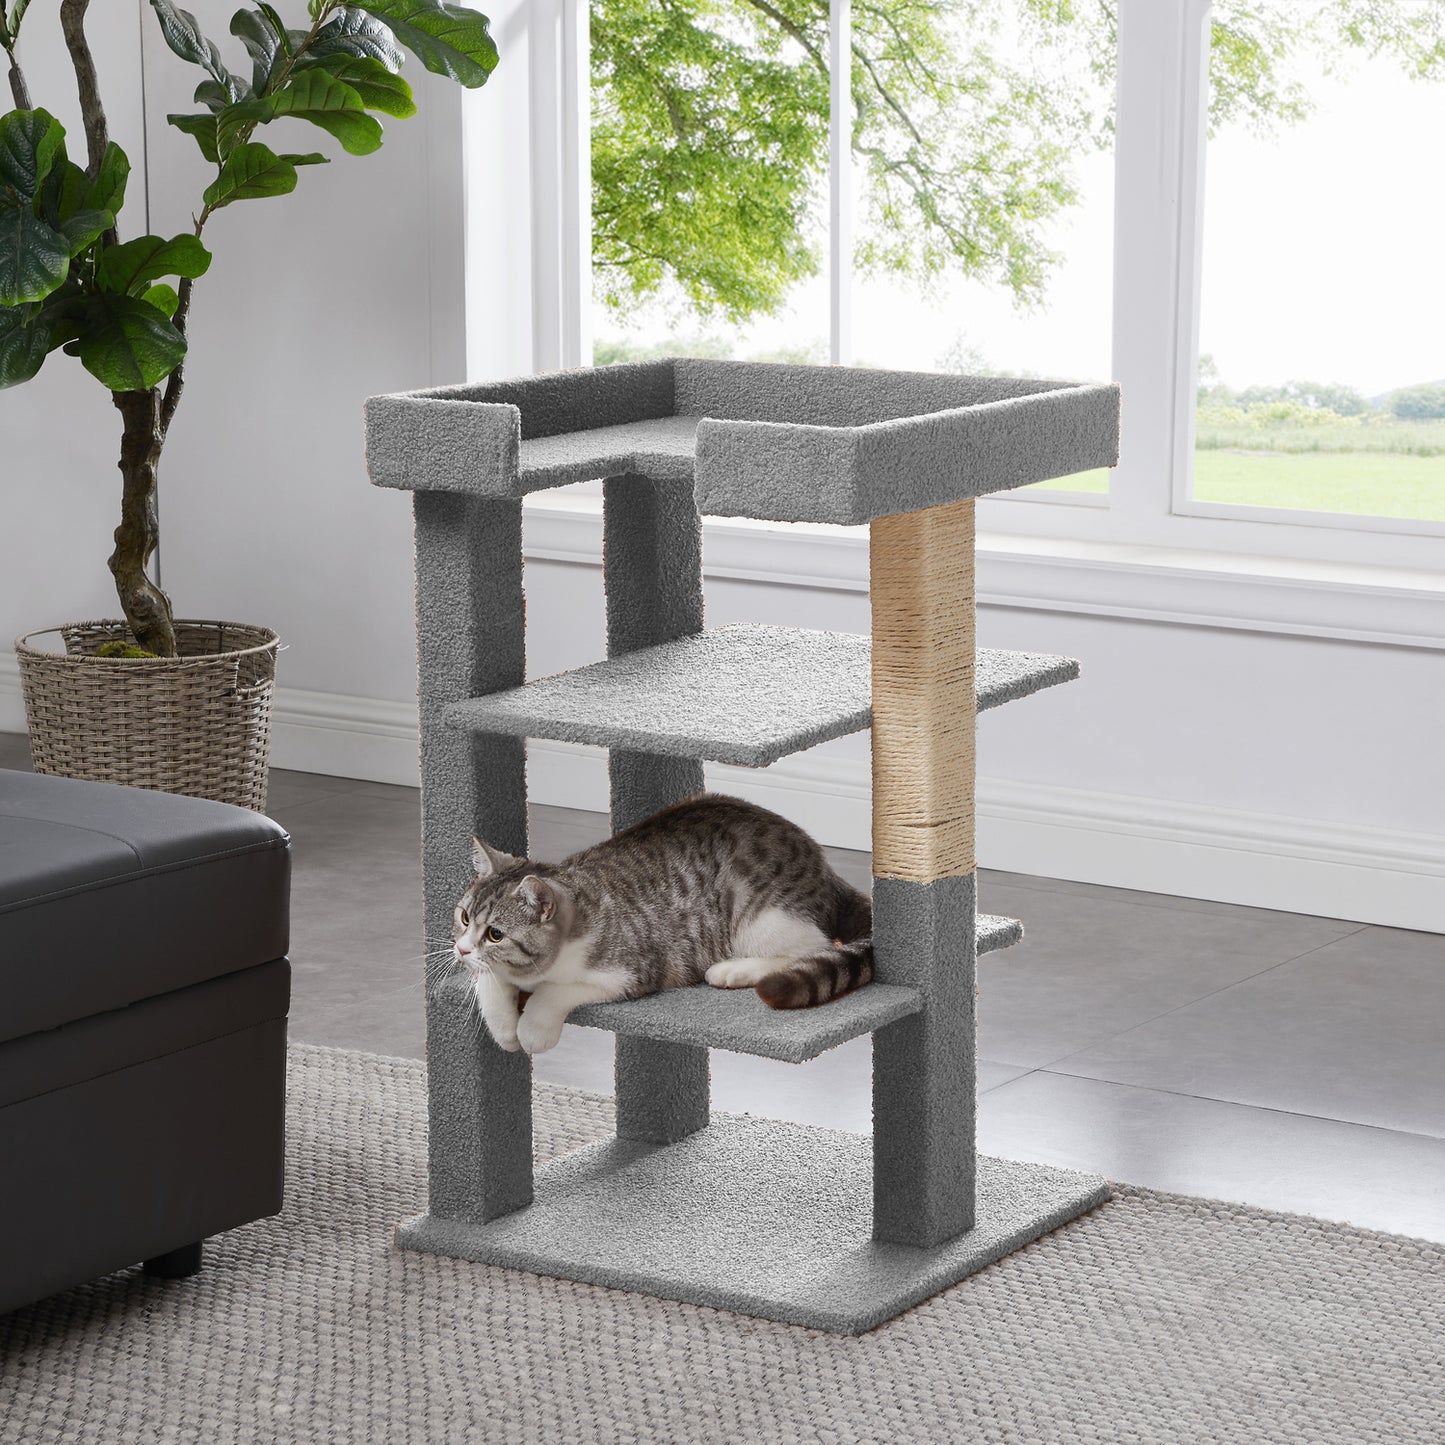 Naomi Home Multi-Level Cat Scratch Tower Wooden Furniture, Cat Home for Large, Small, Little Cats-Color: Beige